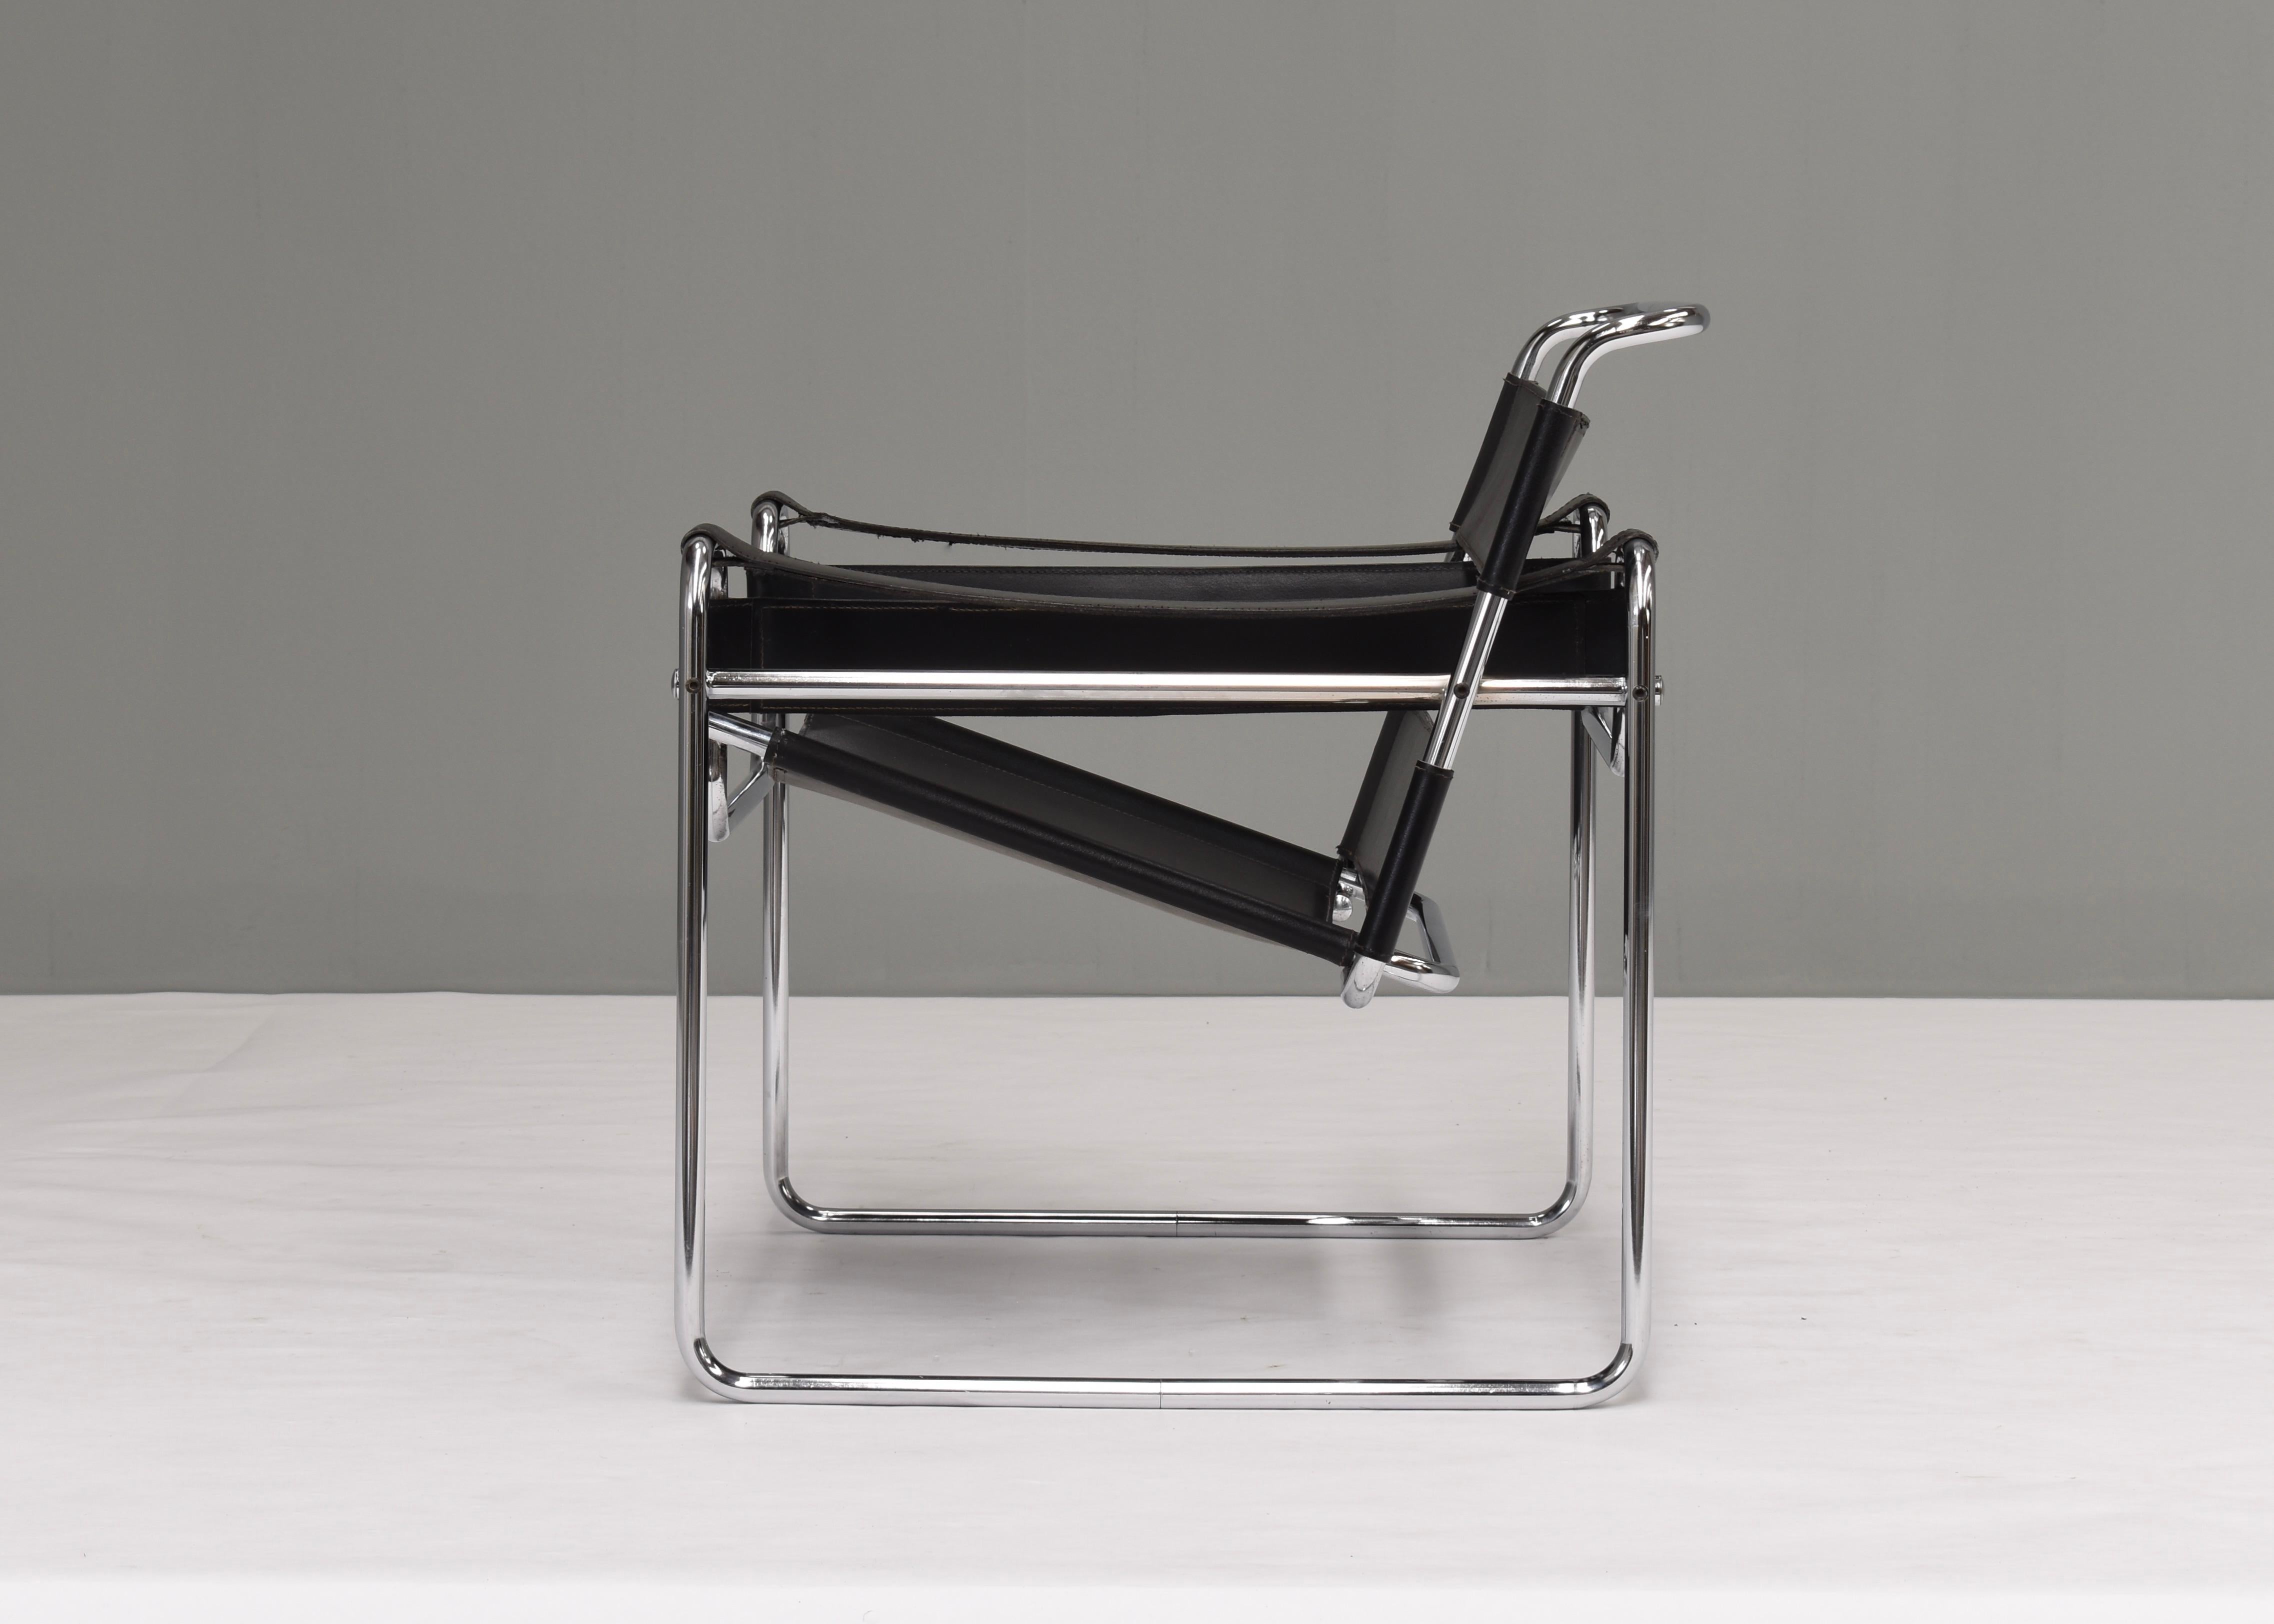 Wassily chair by Marcel Breuer for KNOLL, circa 1970-80

Designer: Marcel Breuer

Manufacturer: KNOLL

Country: USA

Model: Wassily armchair

Design period: circa 1925

Date of manufacturing: 1970-80’s

Size cm W x D x H: 79 x 66 x 73,